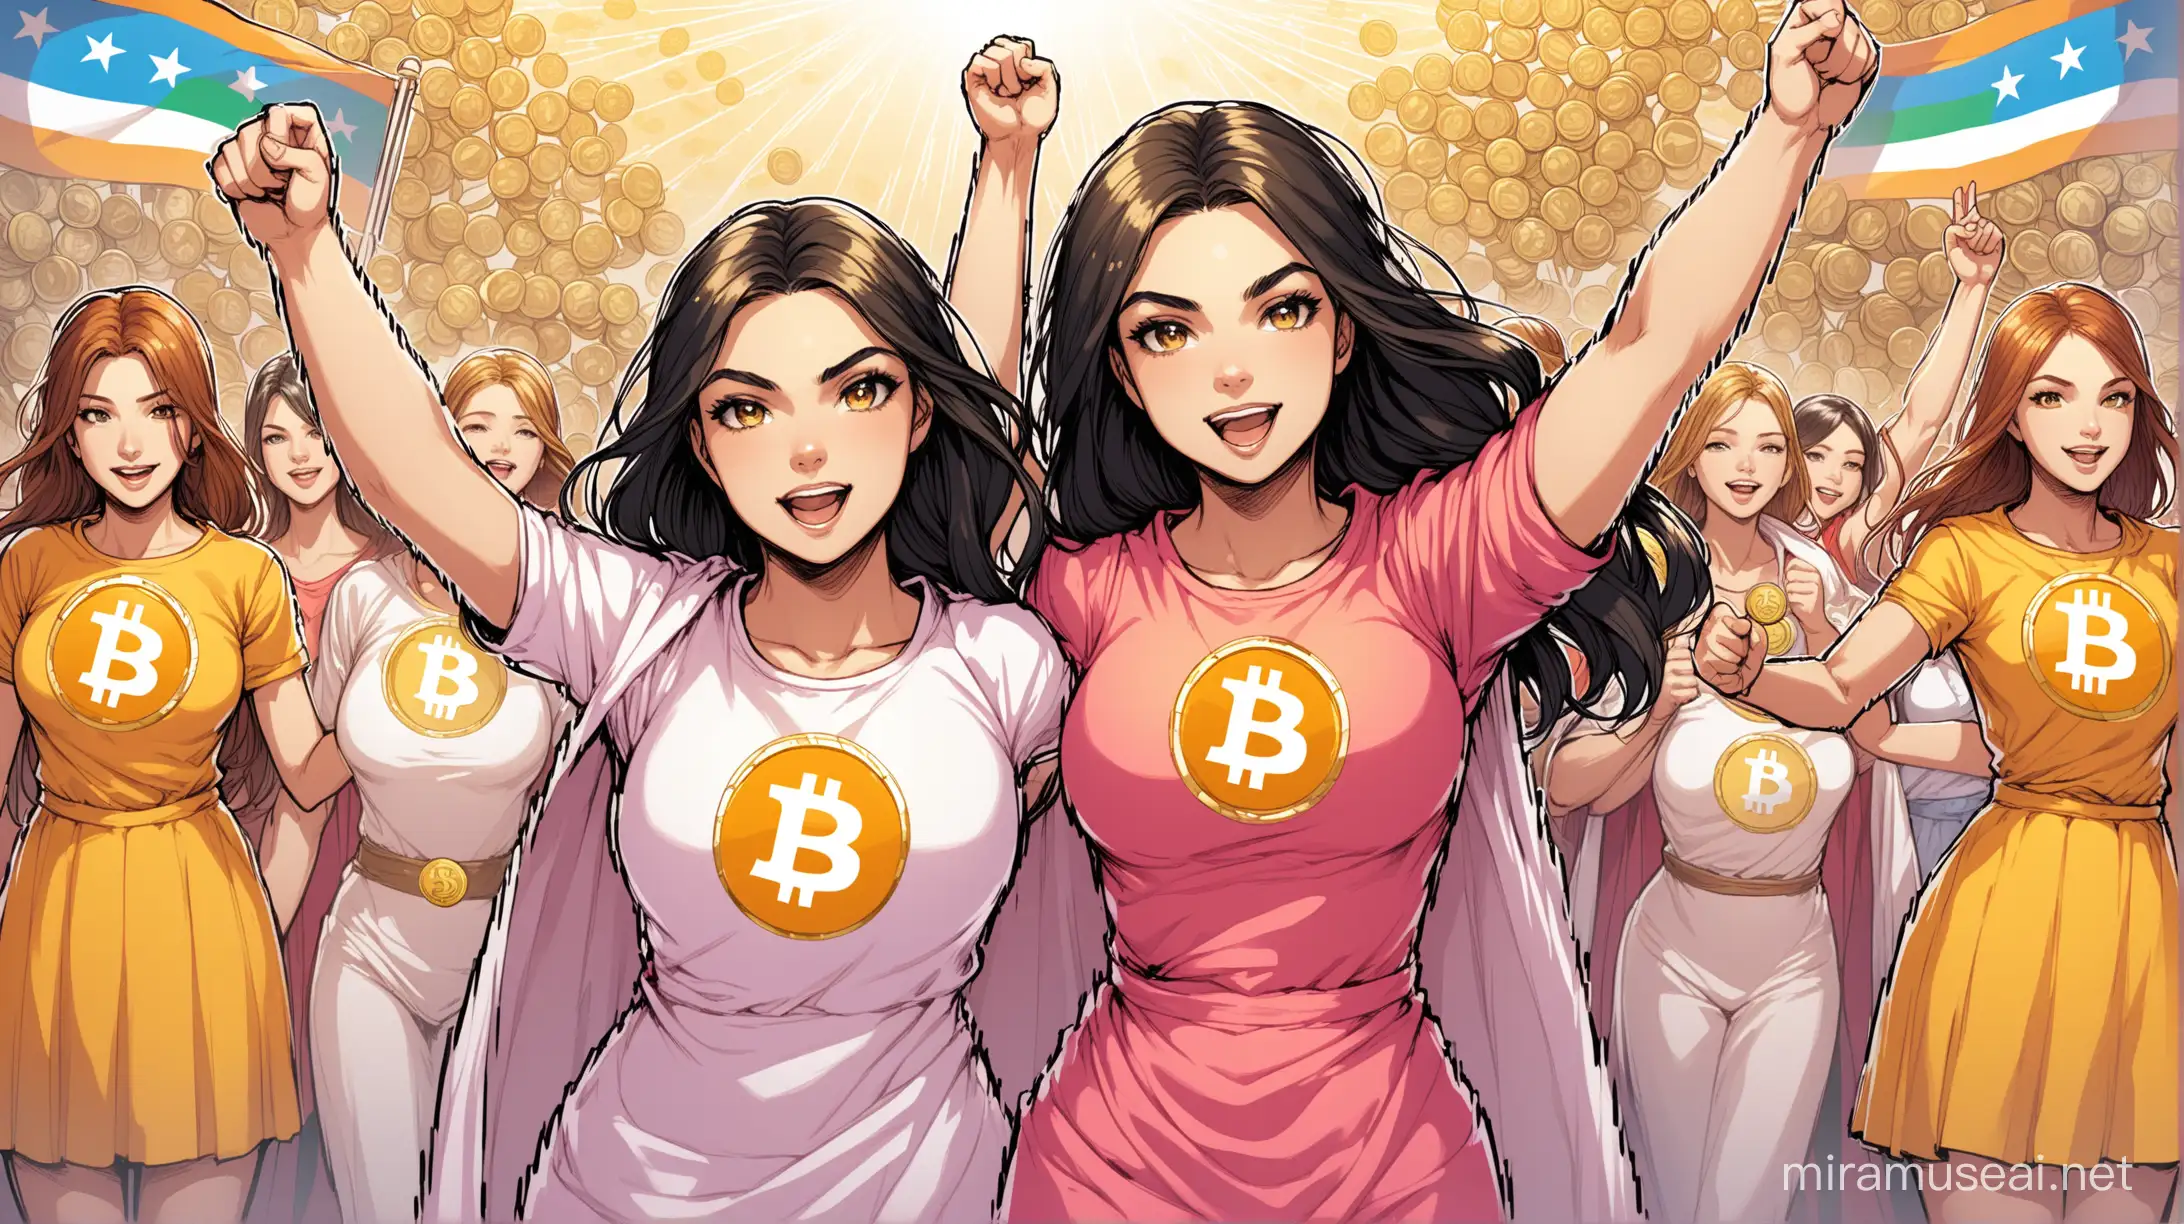 Create a strong image with a clear message connecting human rights, Bitcoin, freedom, and permissionless money for the first time in human history - with the power of women with non-sexual clothes on.